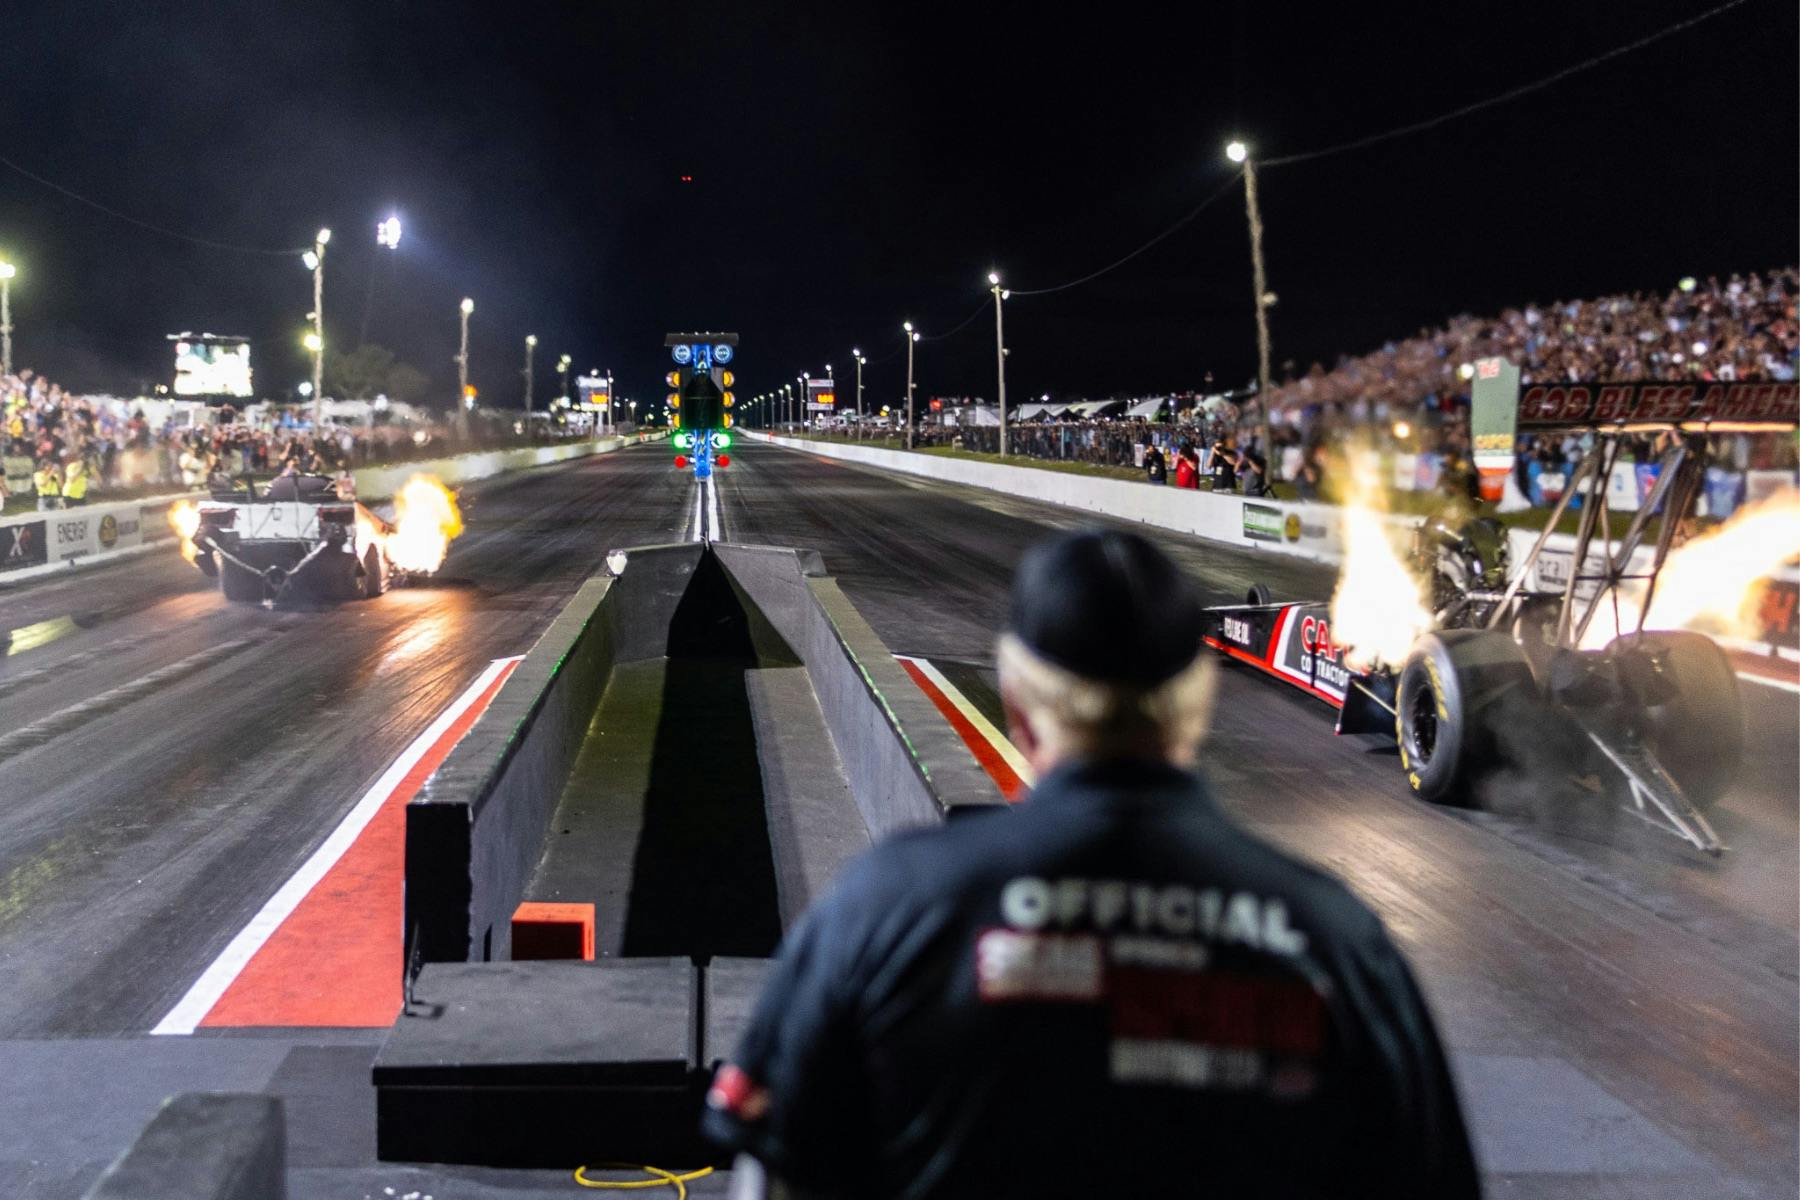 Chad Green (left lane) vs. Steve Torrence in the Top Fuel vs. Funny Car Shootout final round